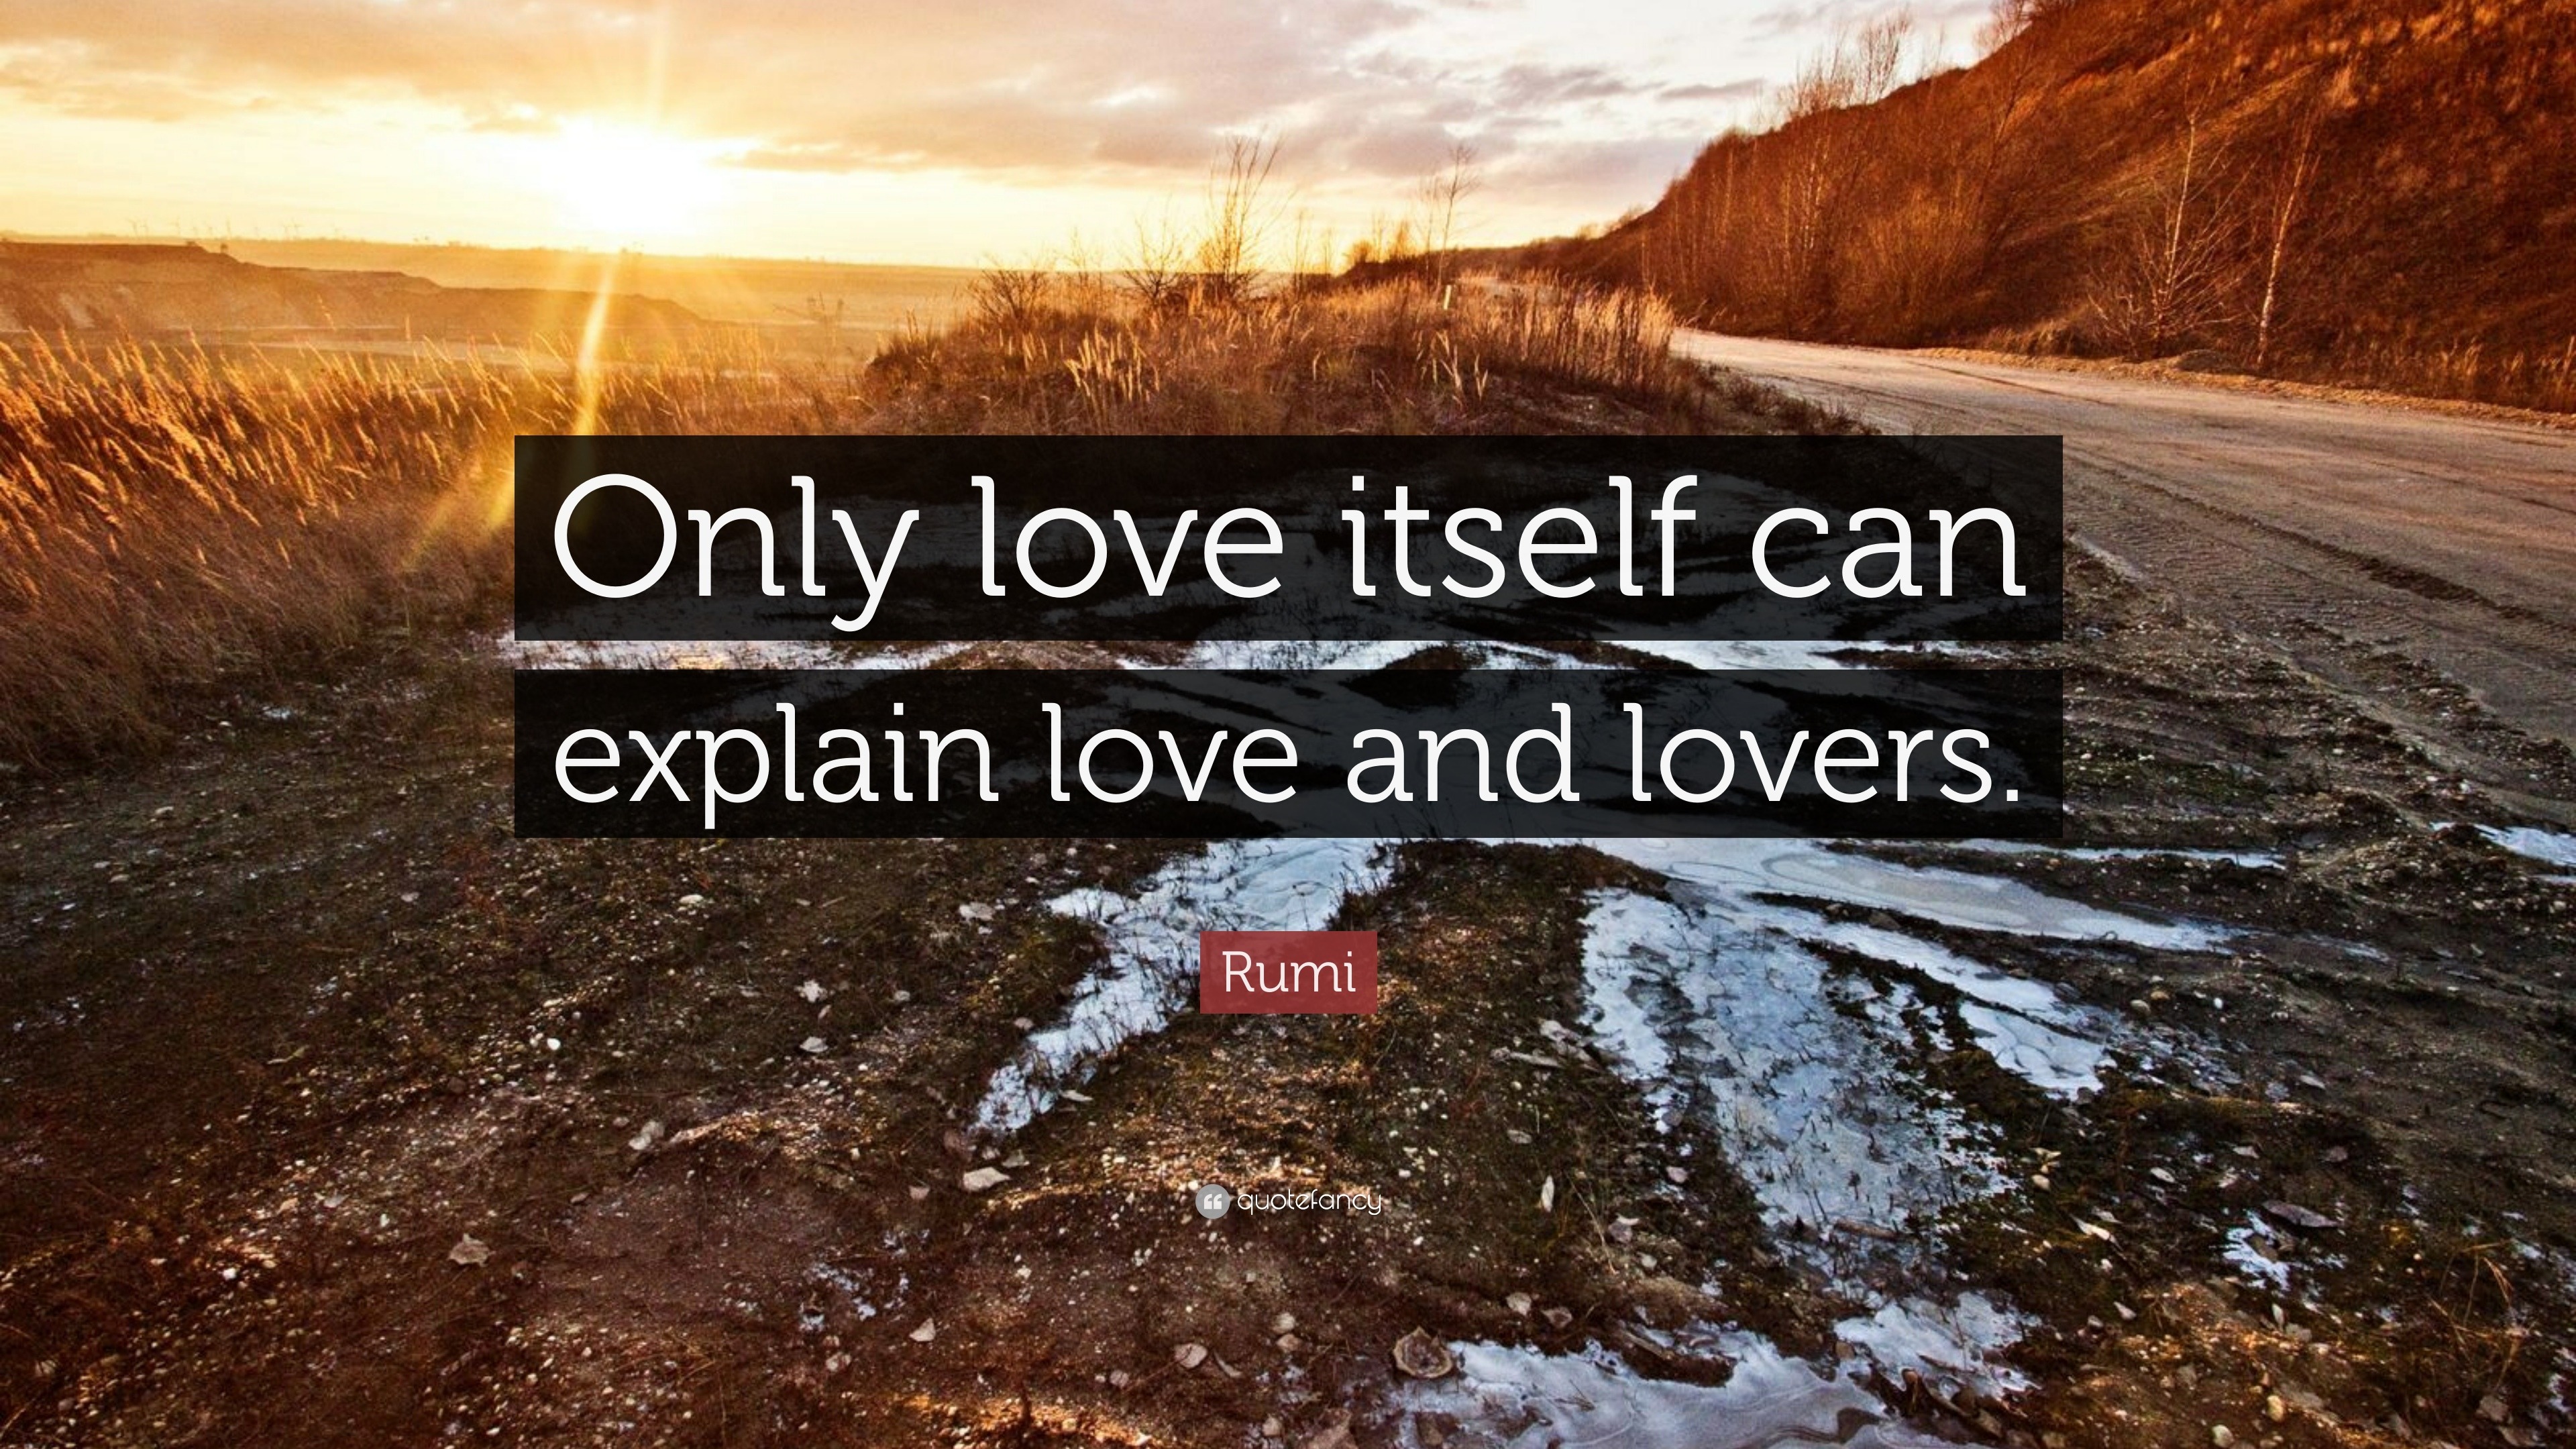 Rumi Quote: “Only love itself can explain love and lovers.”